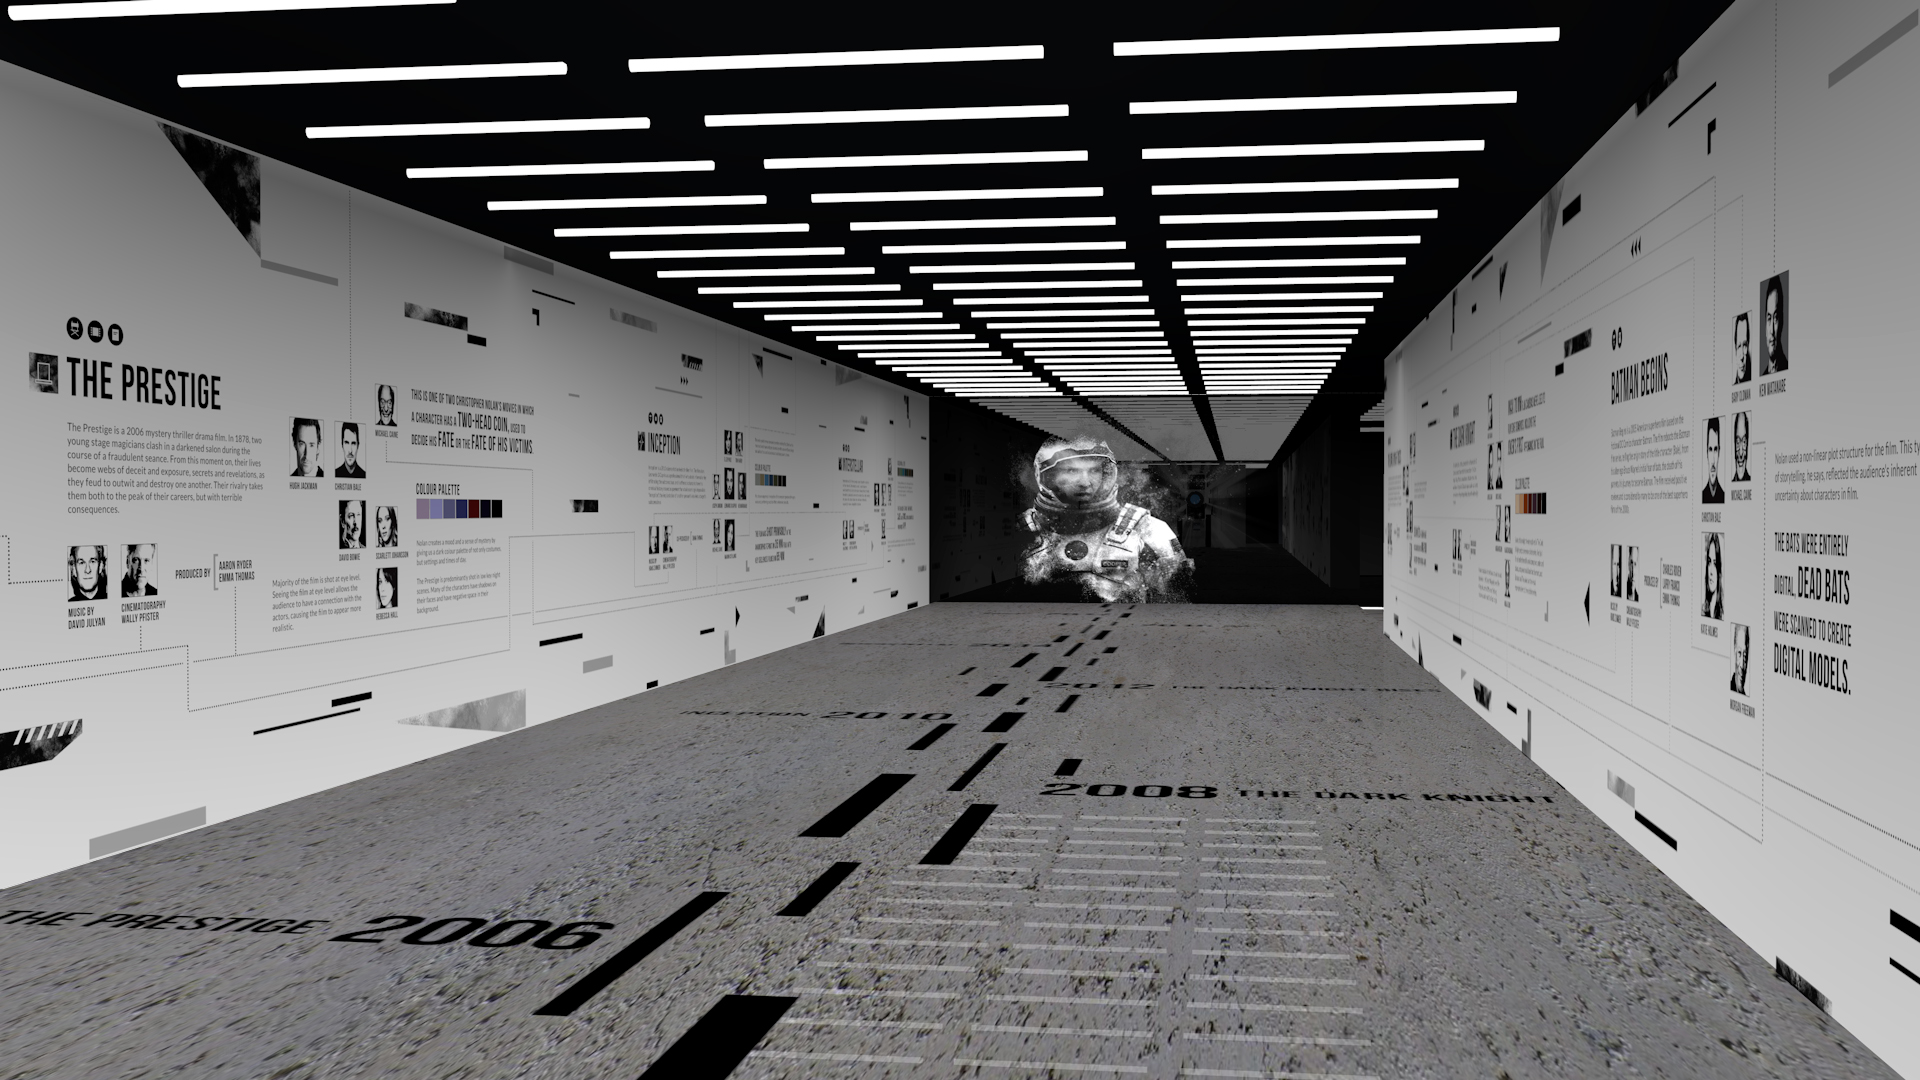 Exploded is an exhibition that looks inside the mind of iconic film director, Christopher Nolan